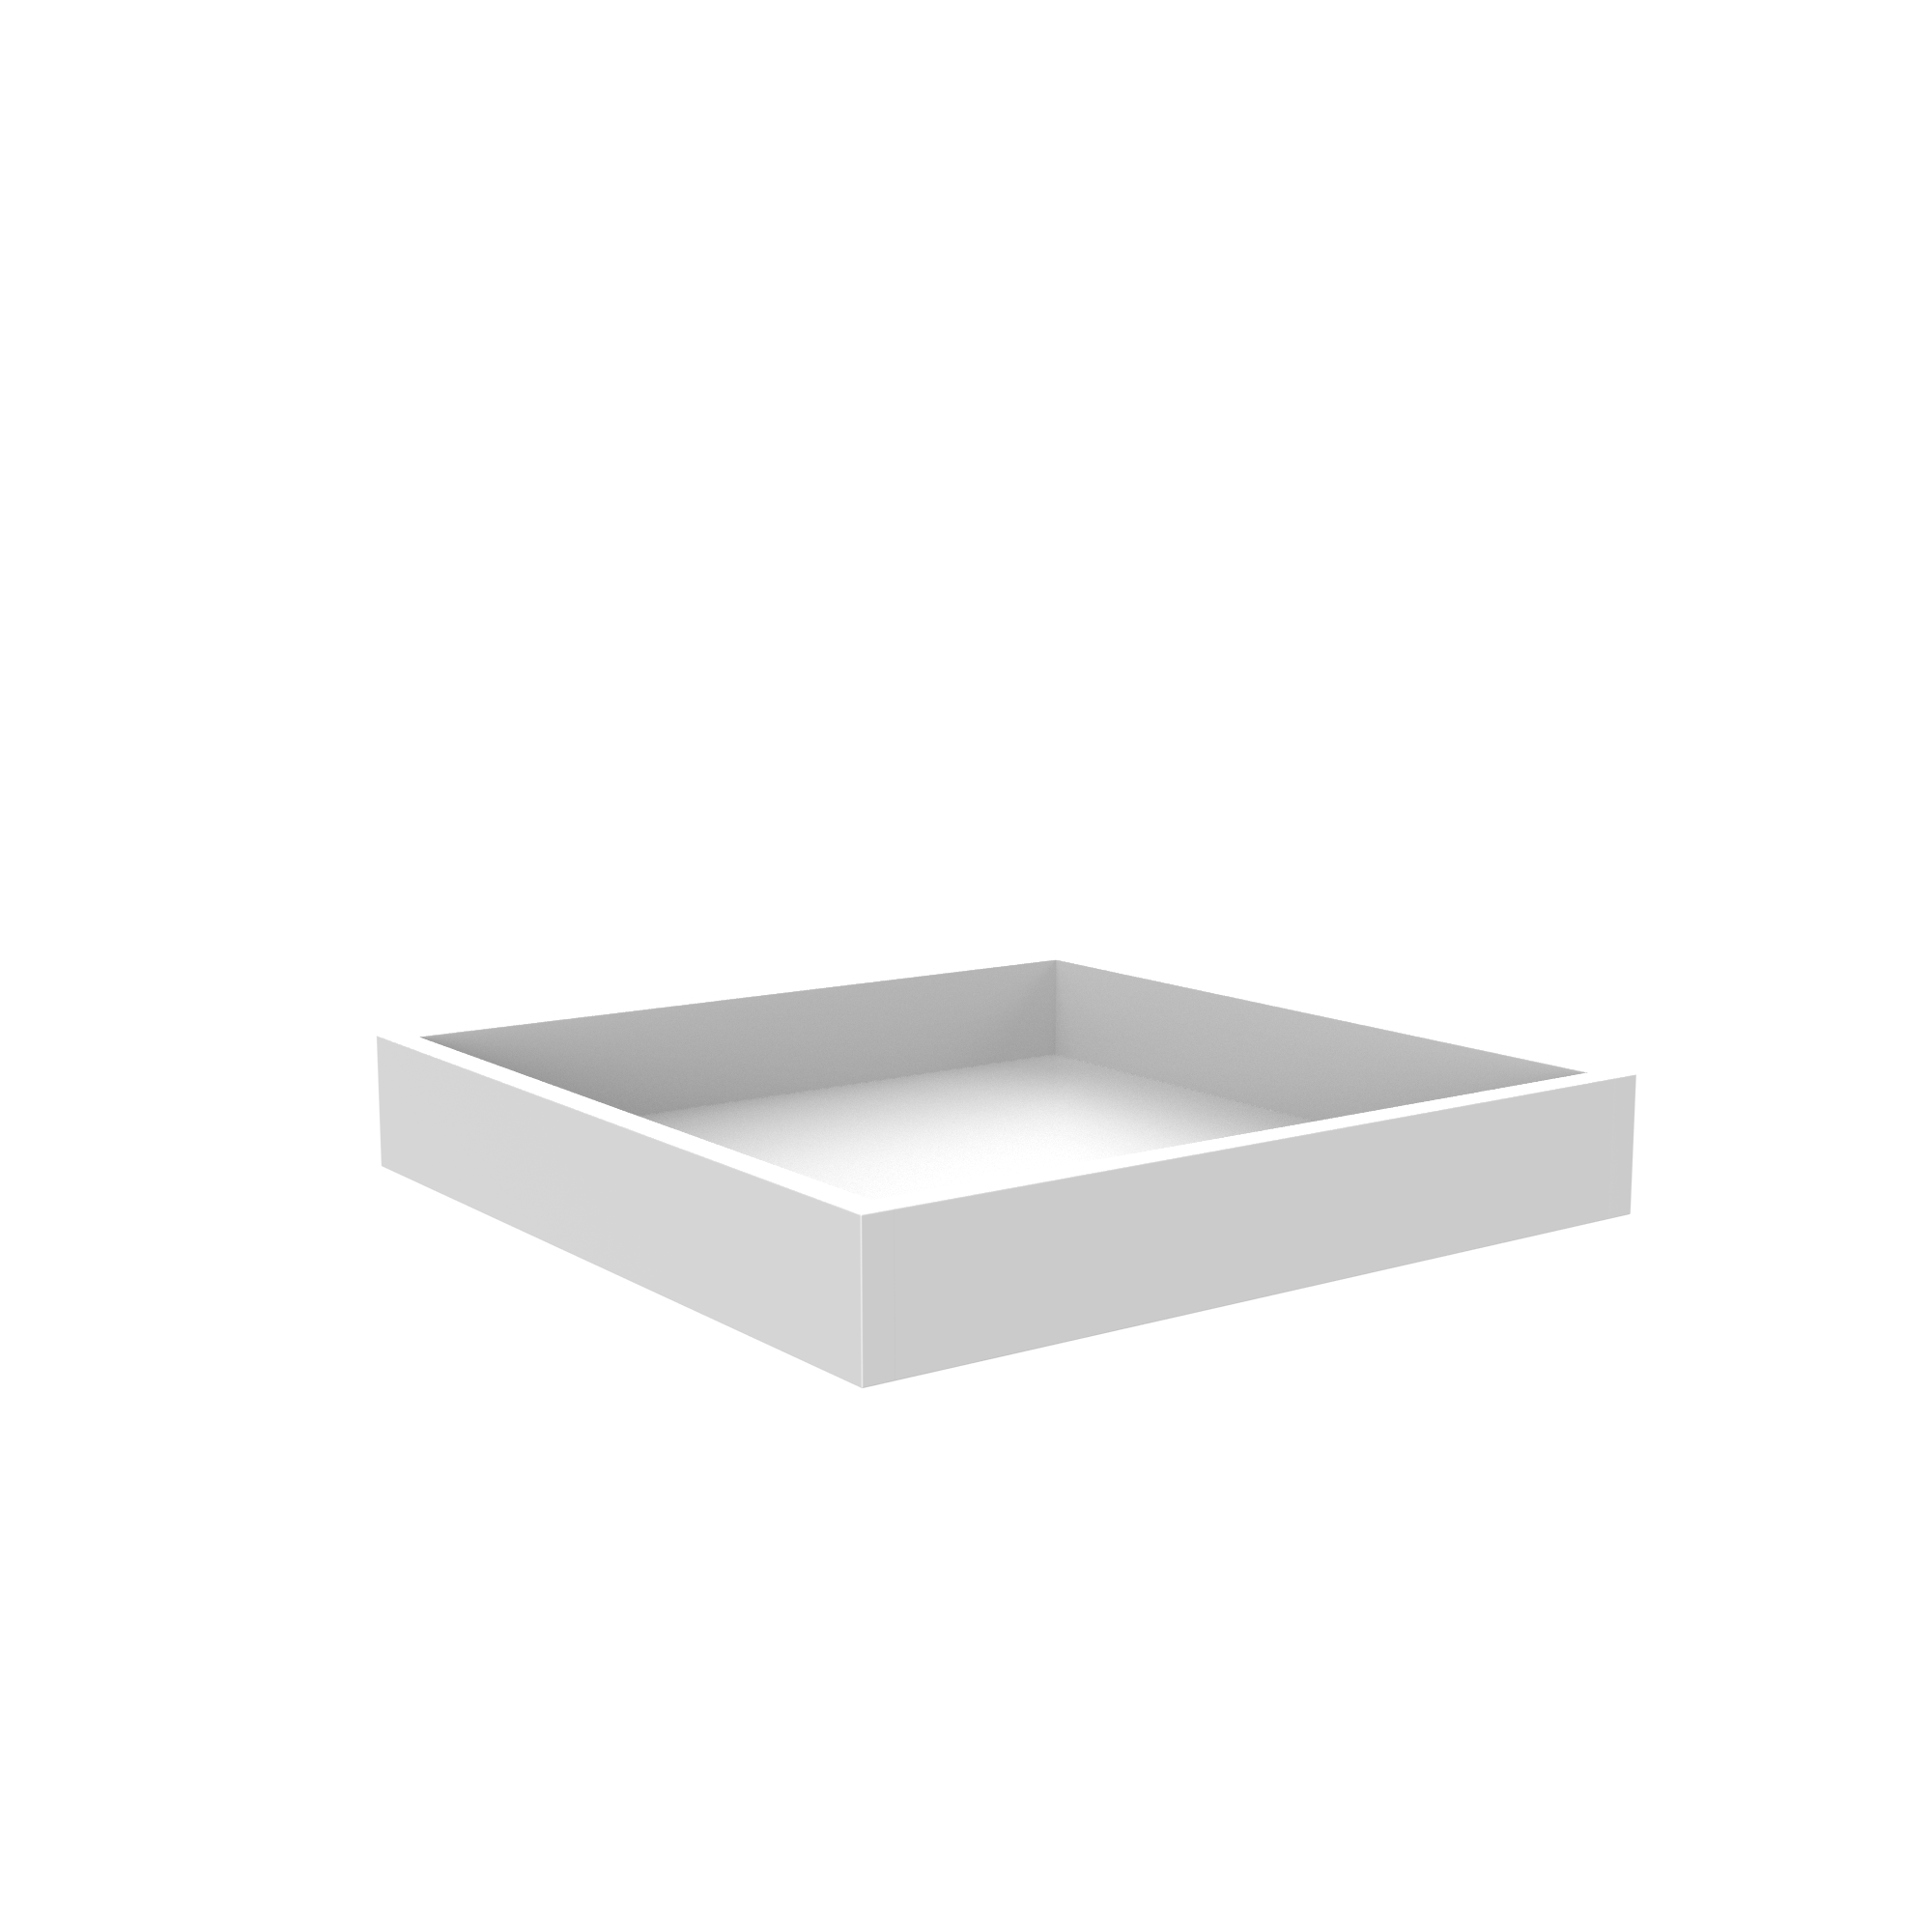 Roll Out Tray for Cabinets - Fits B21 - Aria White Shaker Cabinet